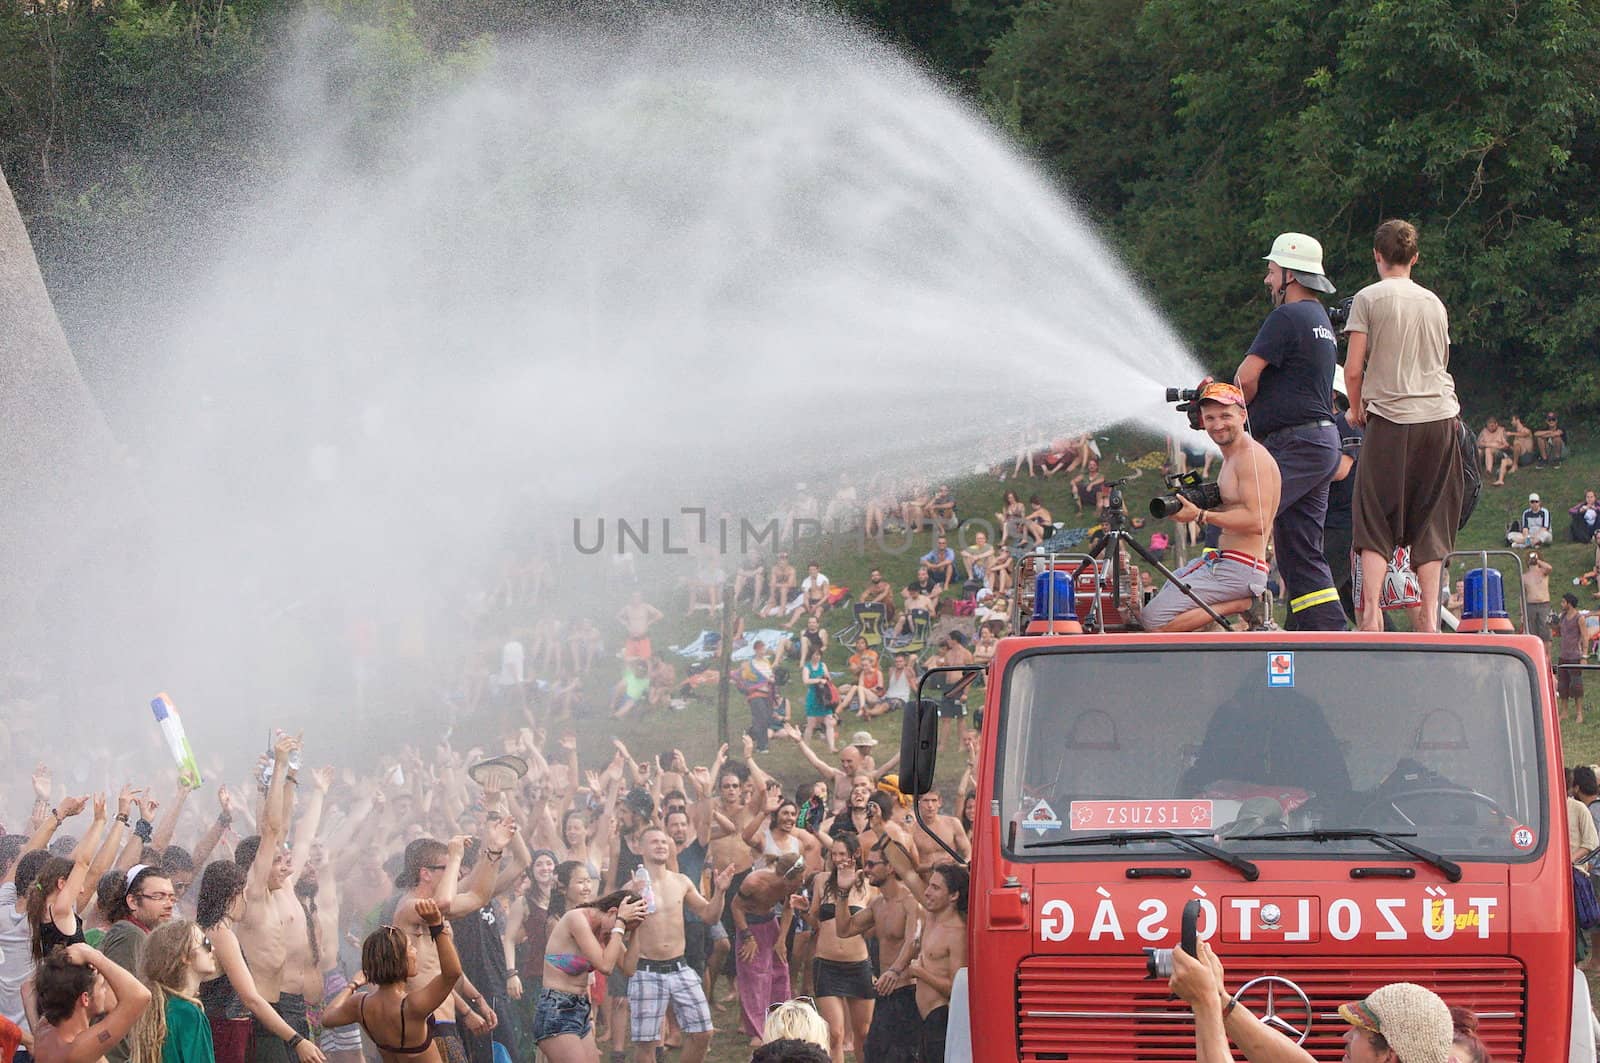 OZORA, HUNGARY - AUGUST 01: Fire department spray water on crowd by anderm